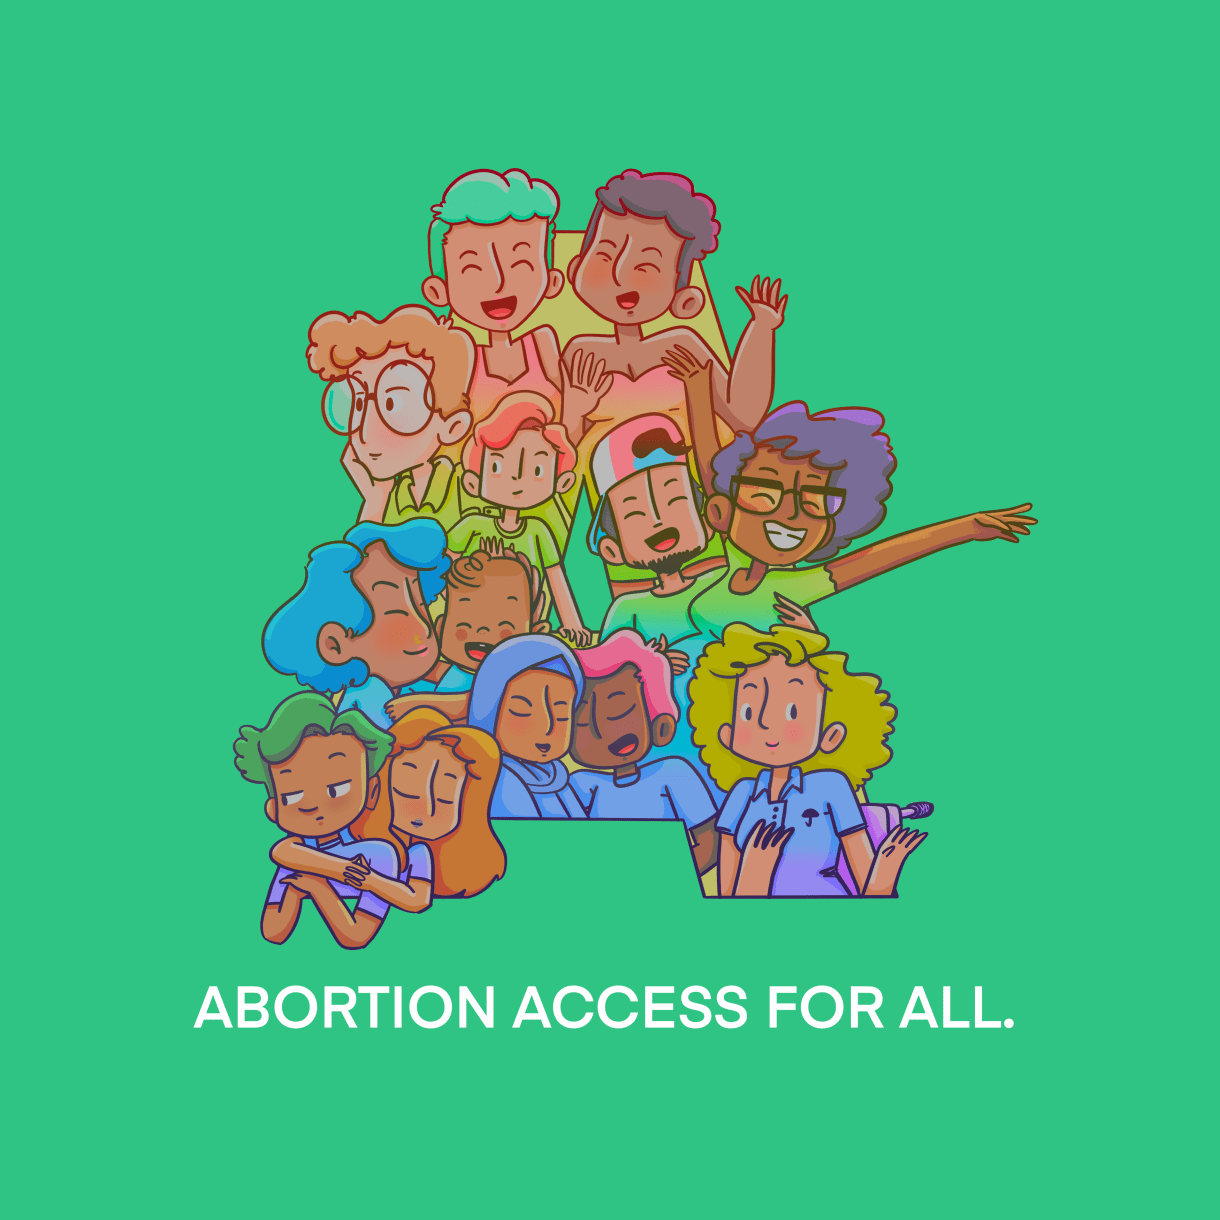 A comic features a single green background panel with a group of various people of different genders and ages all embracing. The bottom reads: ABORTION ACCESS FOR ALL